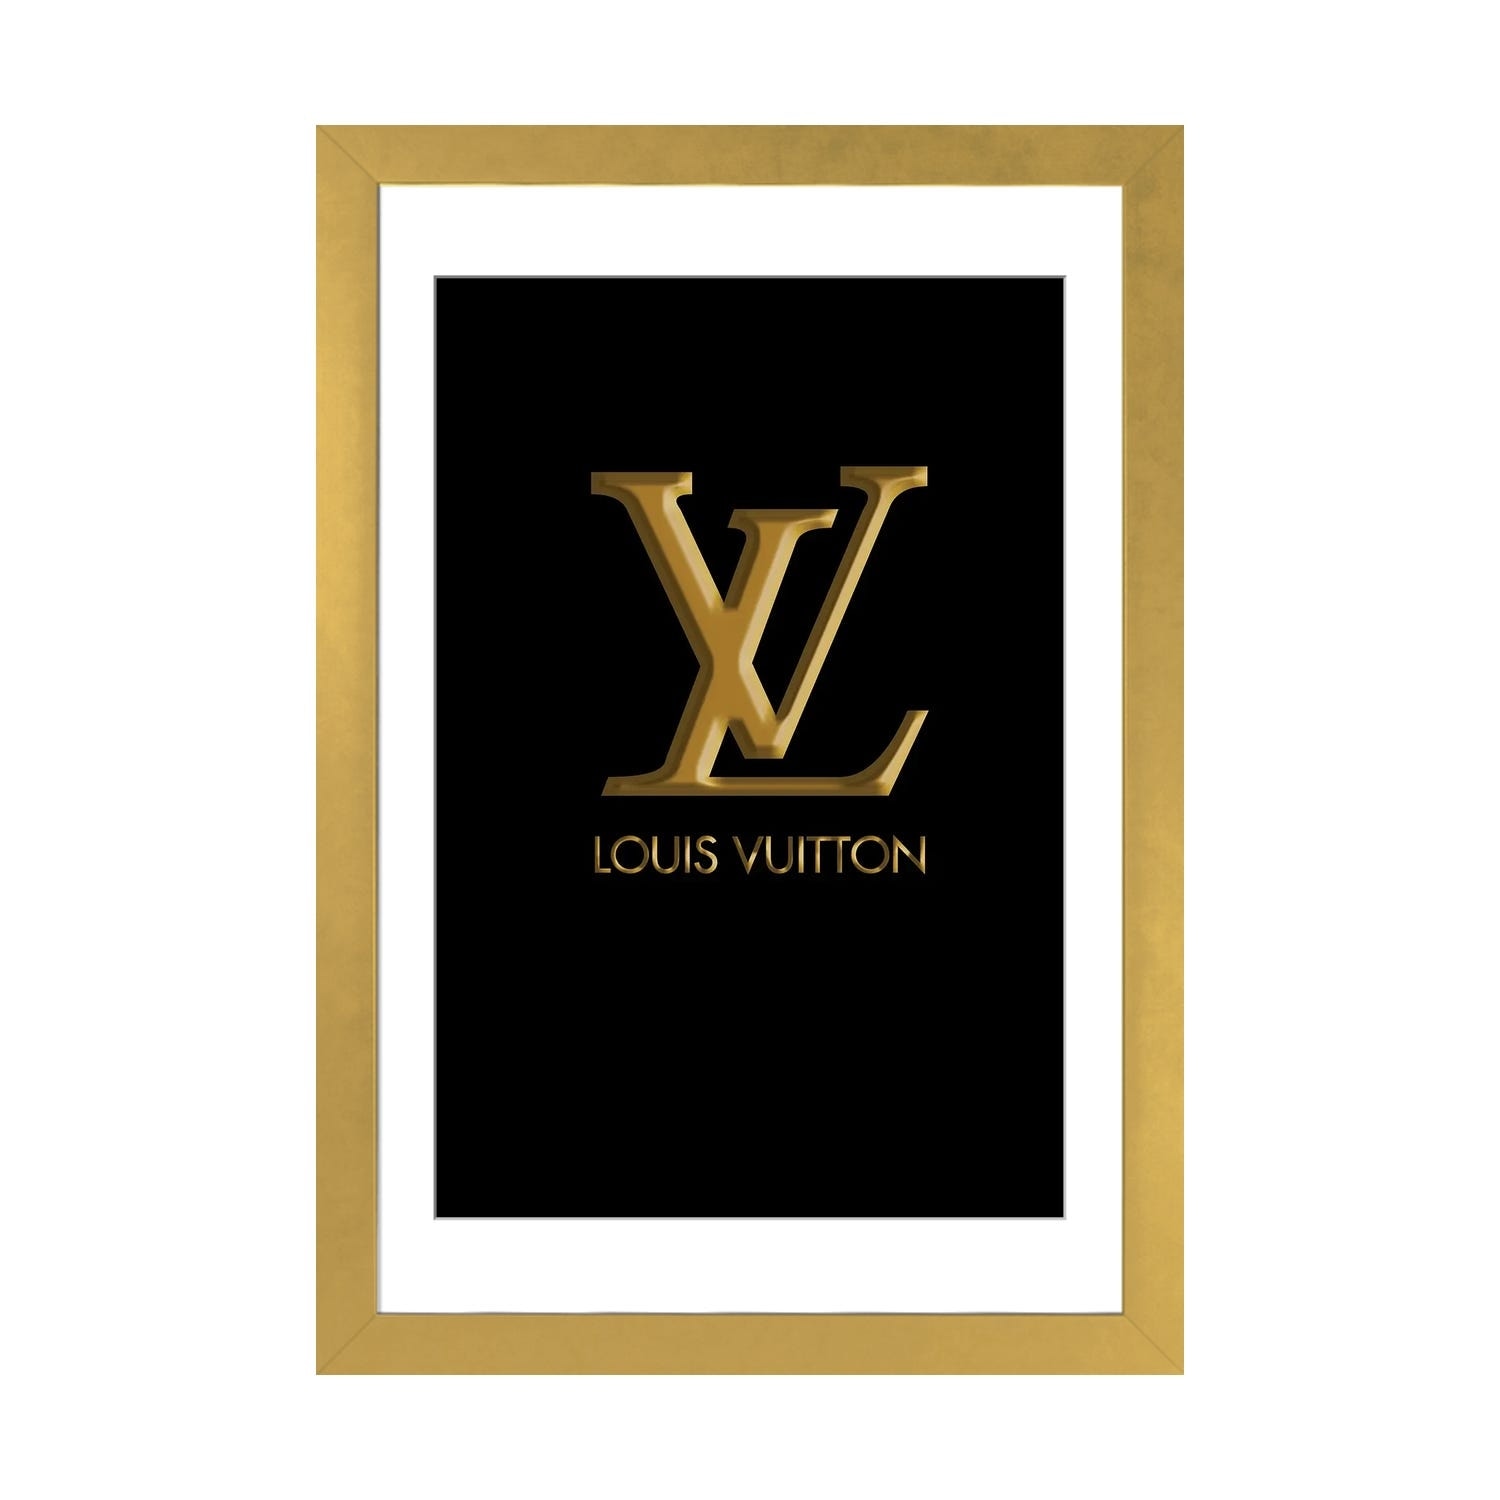 Framed Poster Prints - Louis Vuitton by Paul Rommer ( Fashion > Fashion Brands > Louis Vuitton art) - 32x24x1